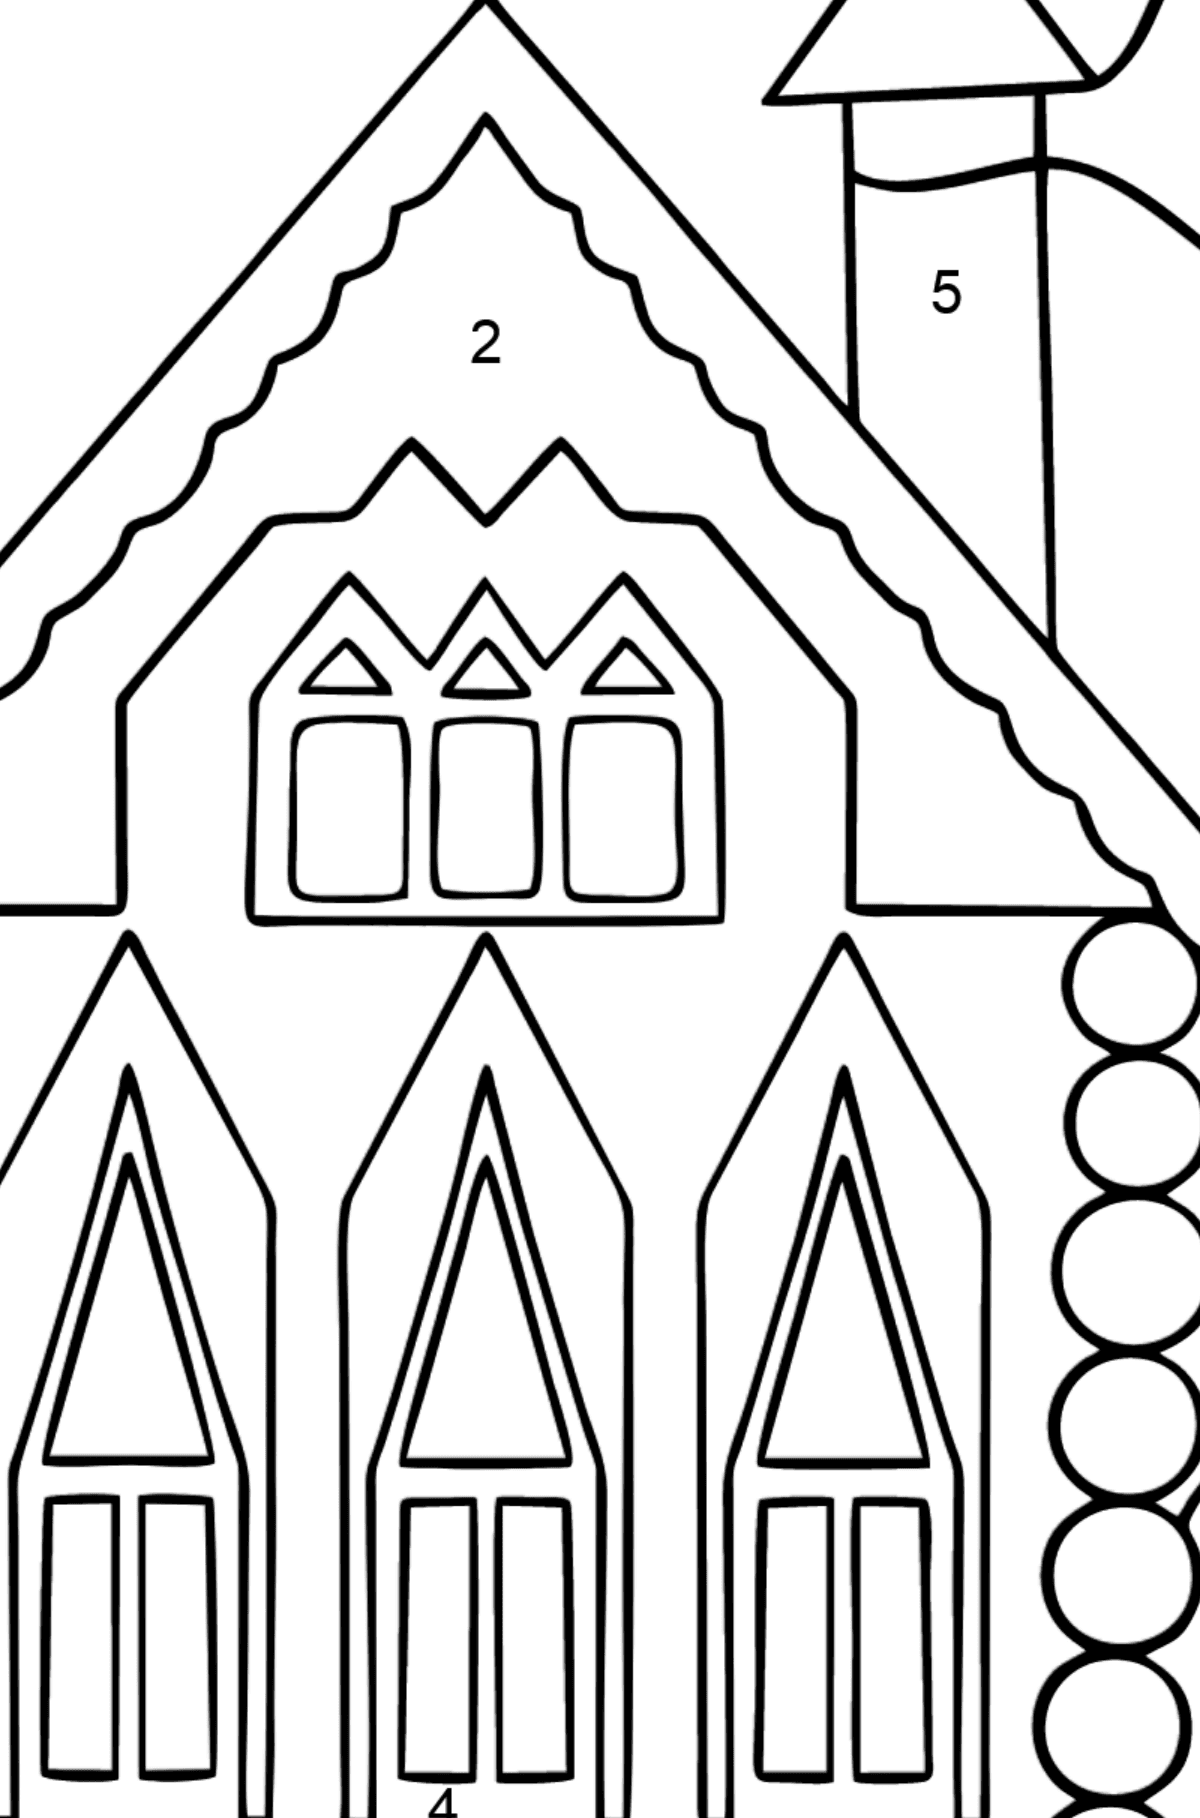 Simple Coloring Page - A Rainbow House - Coloring by Numbers for Kids